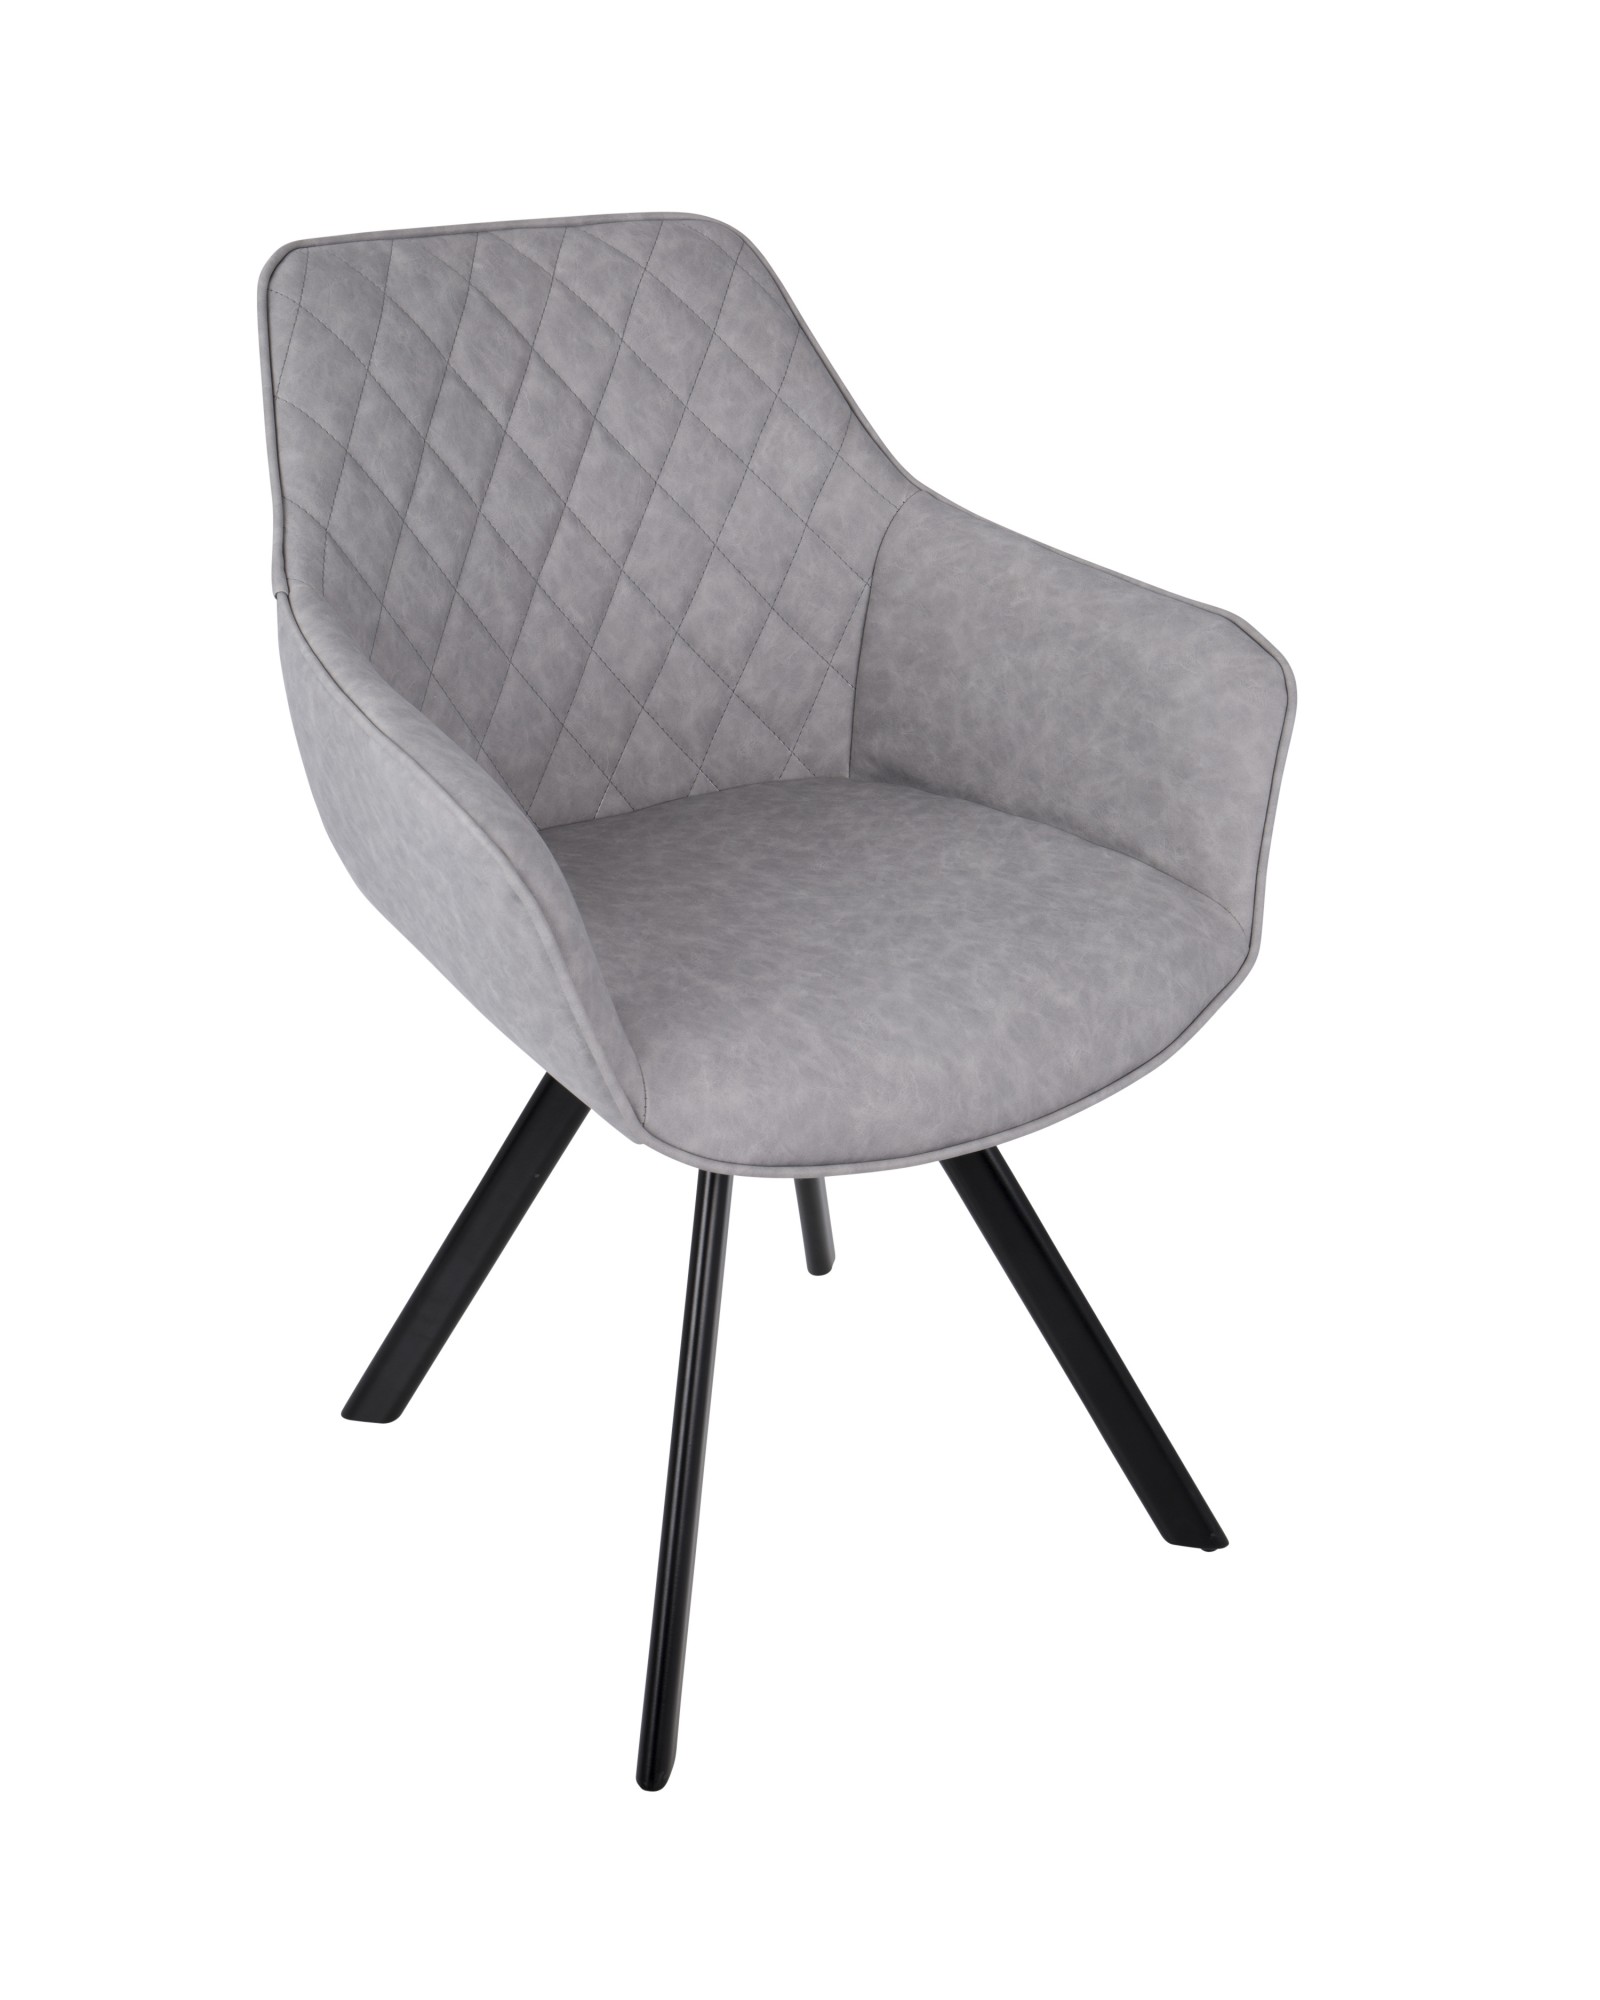 Outlaw Industrial Dining/Accent Chair in Grey Faux Leather - Set of 2